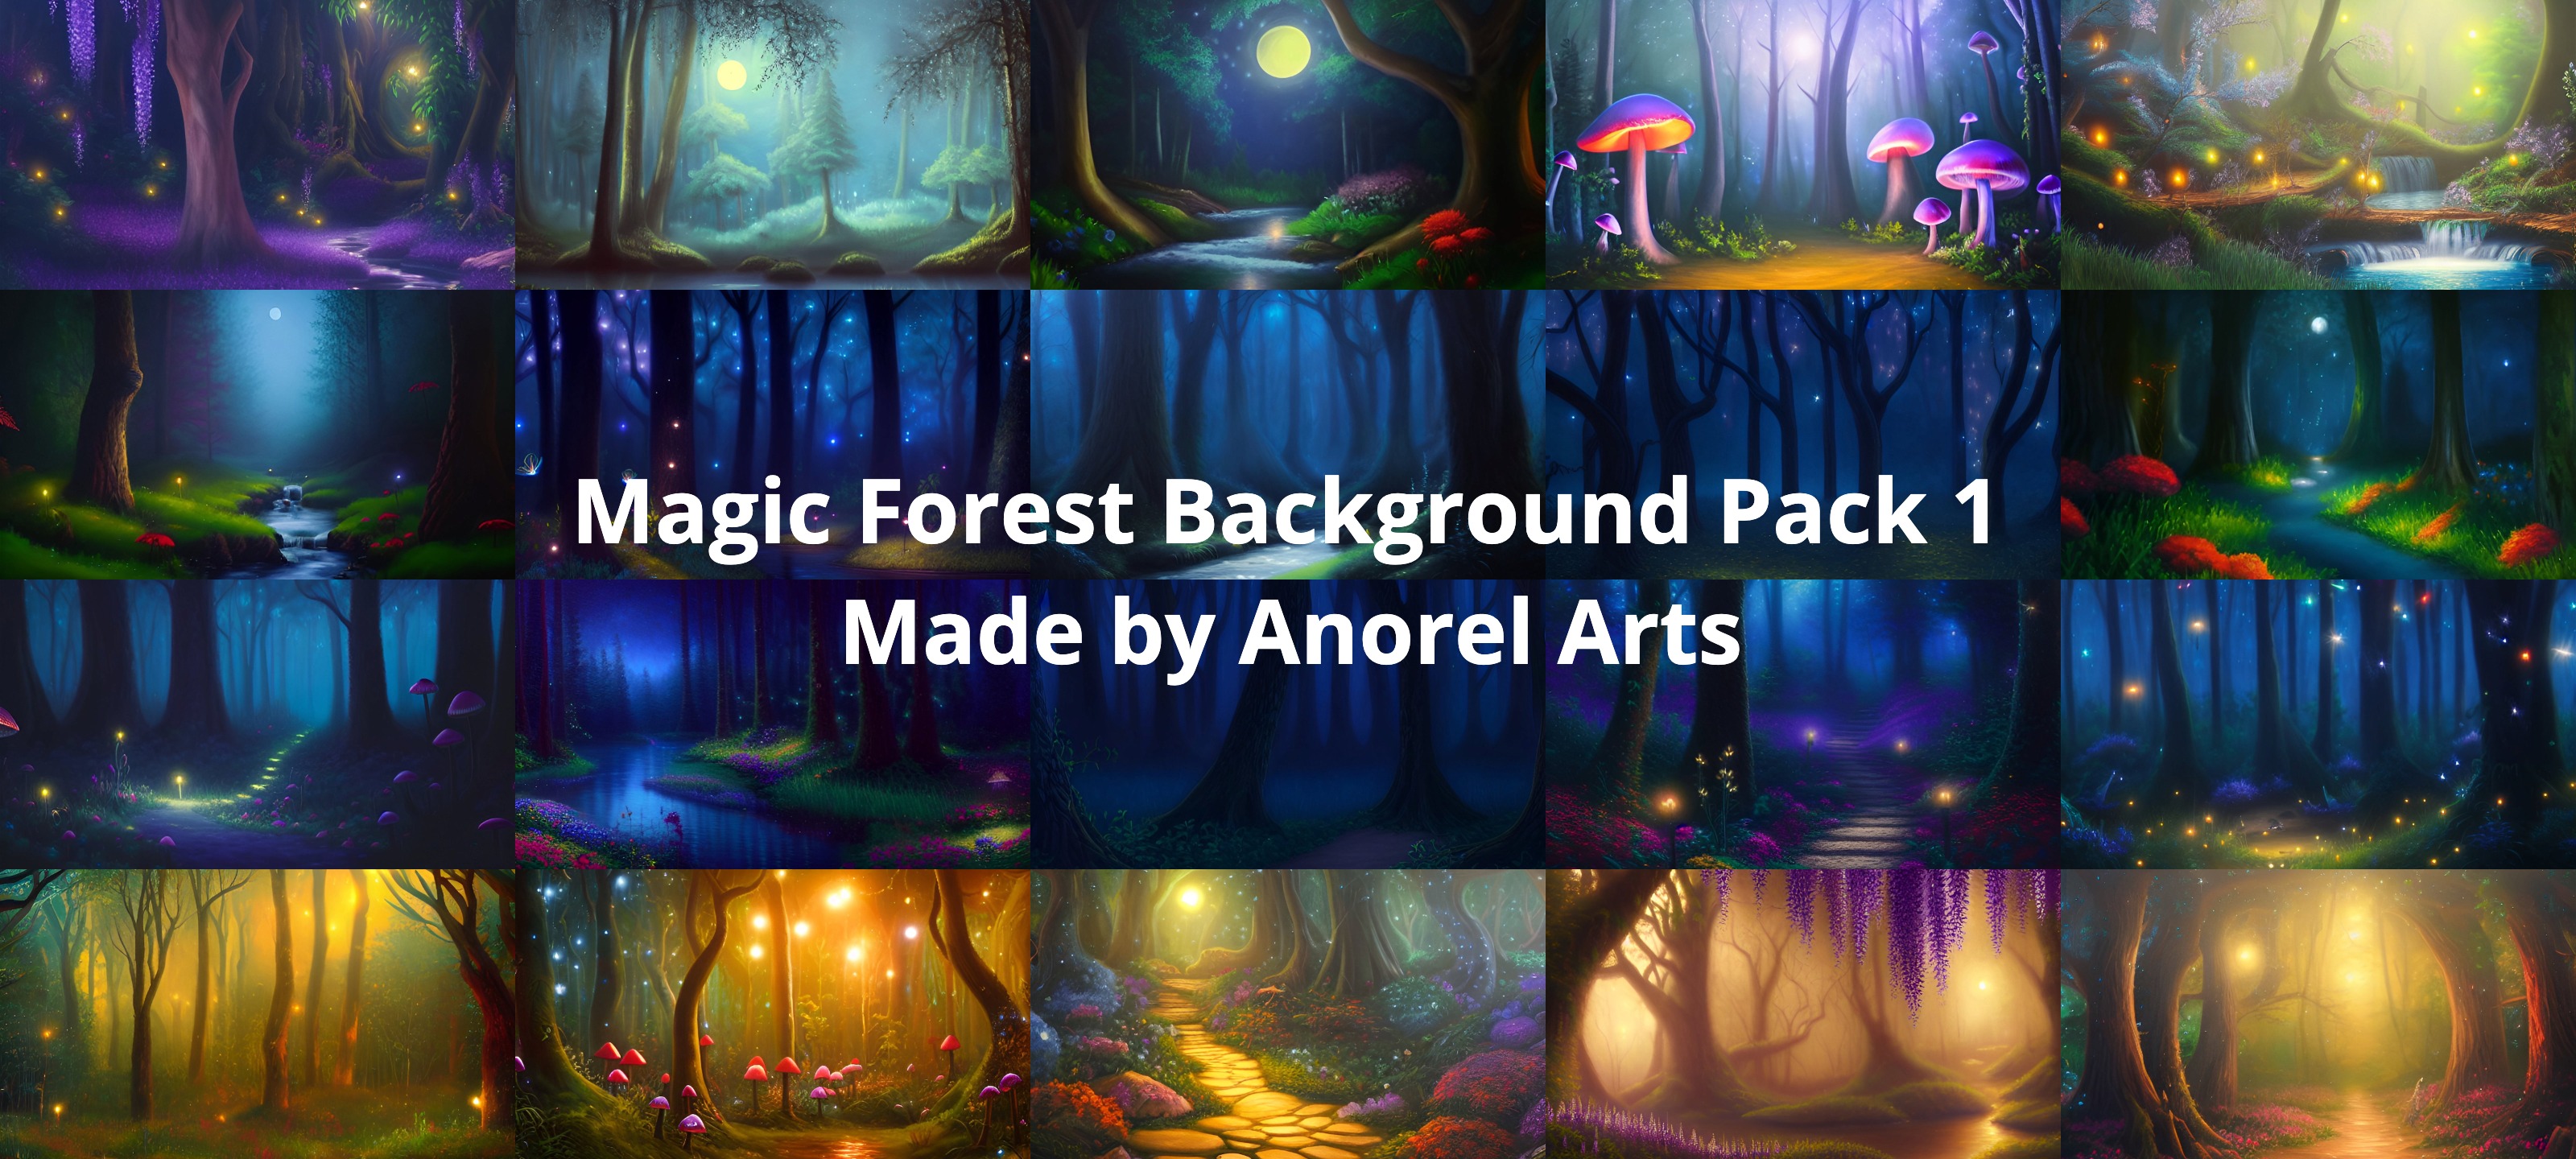 Magic Forest Background Pack 1